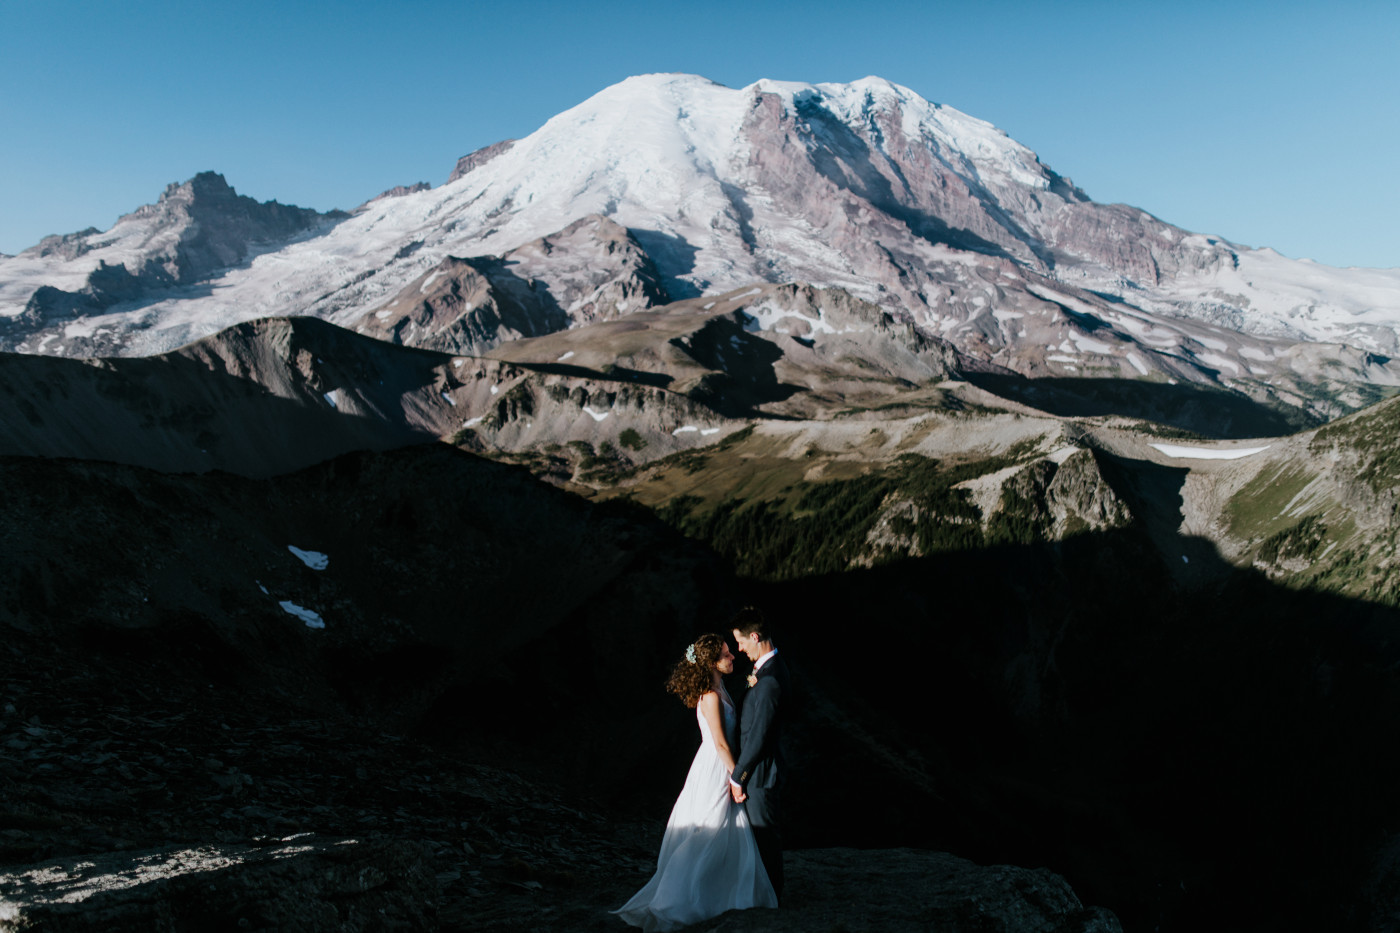 Chad and Tasha stand together at their elopement. Elopement photography at Mount Rainier by Sienna Plus Josh.